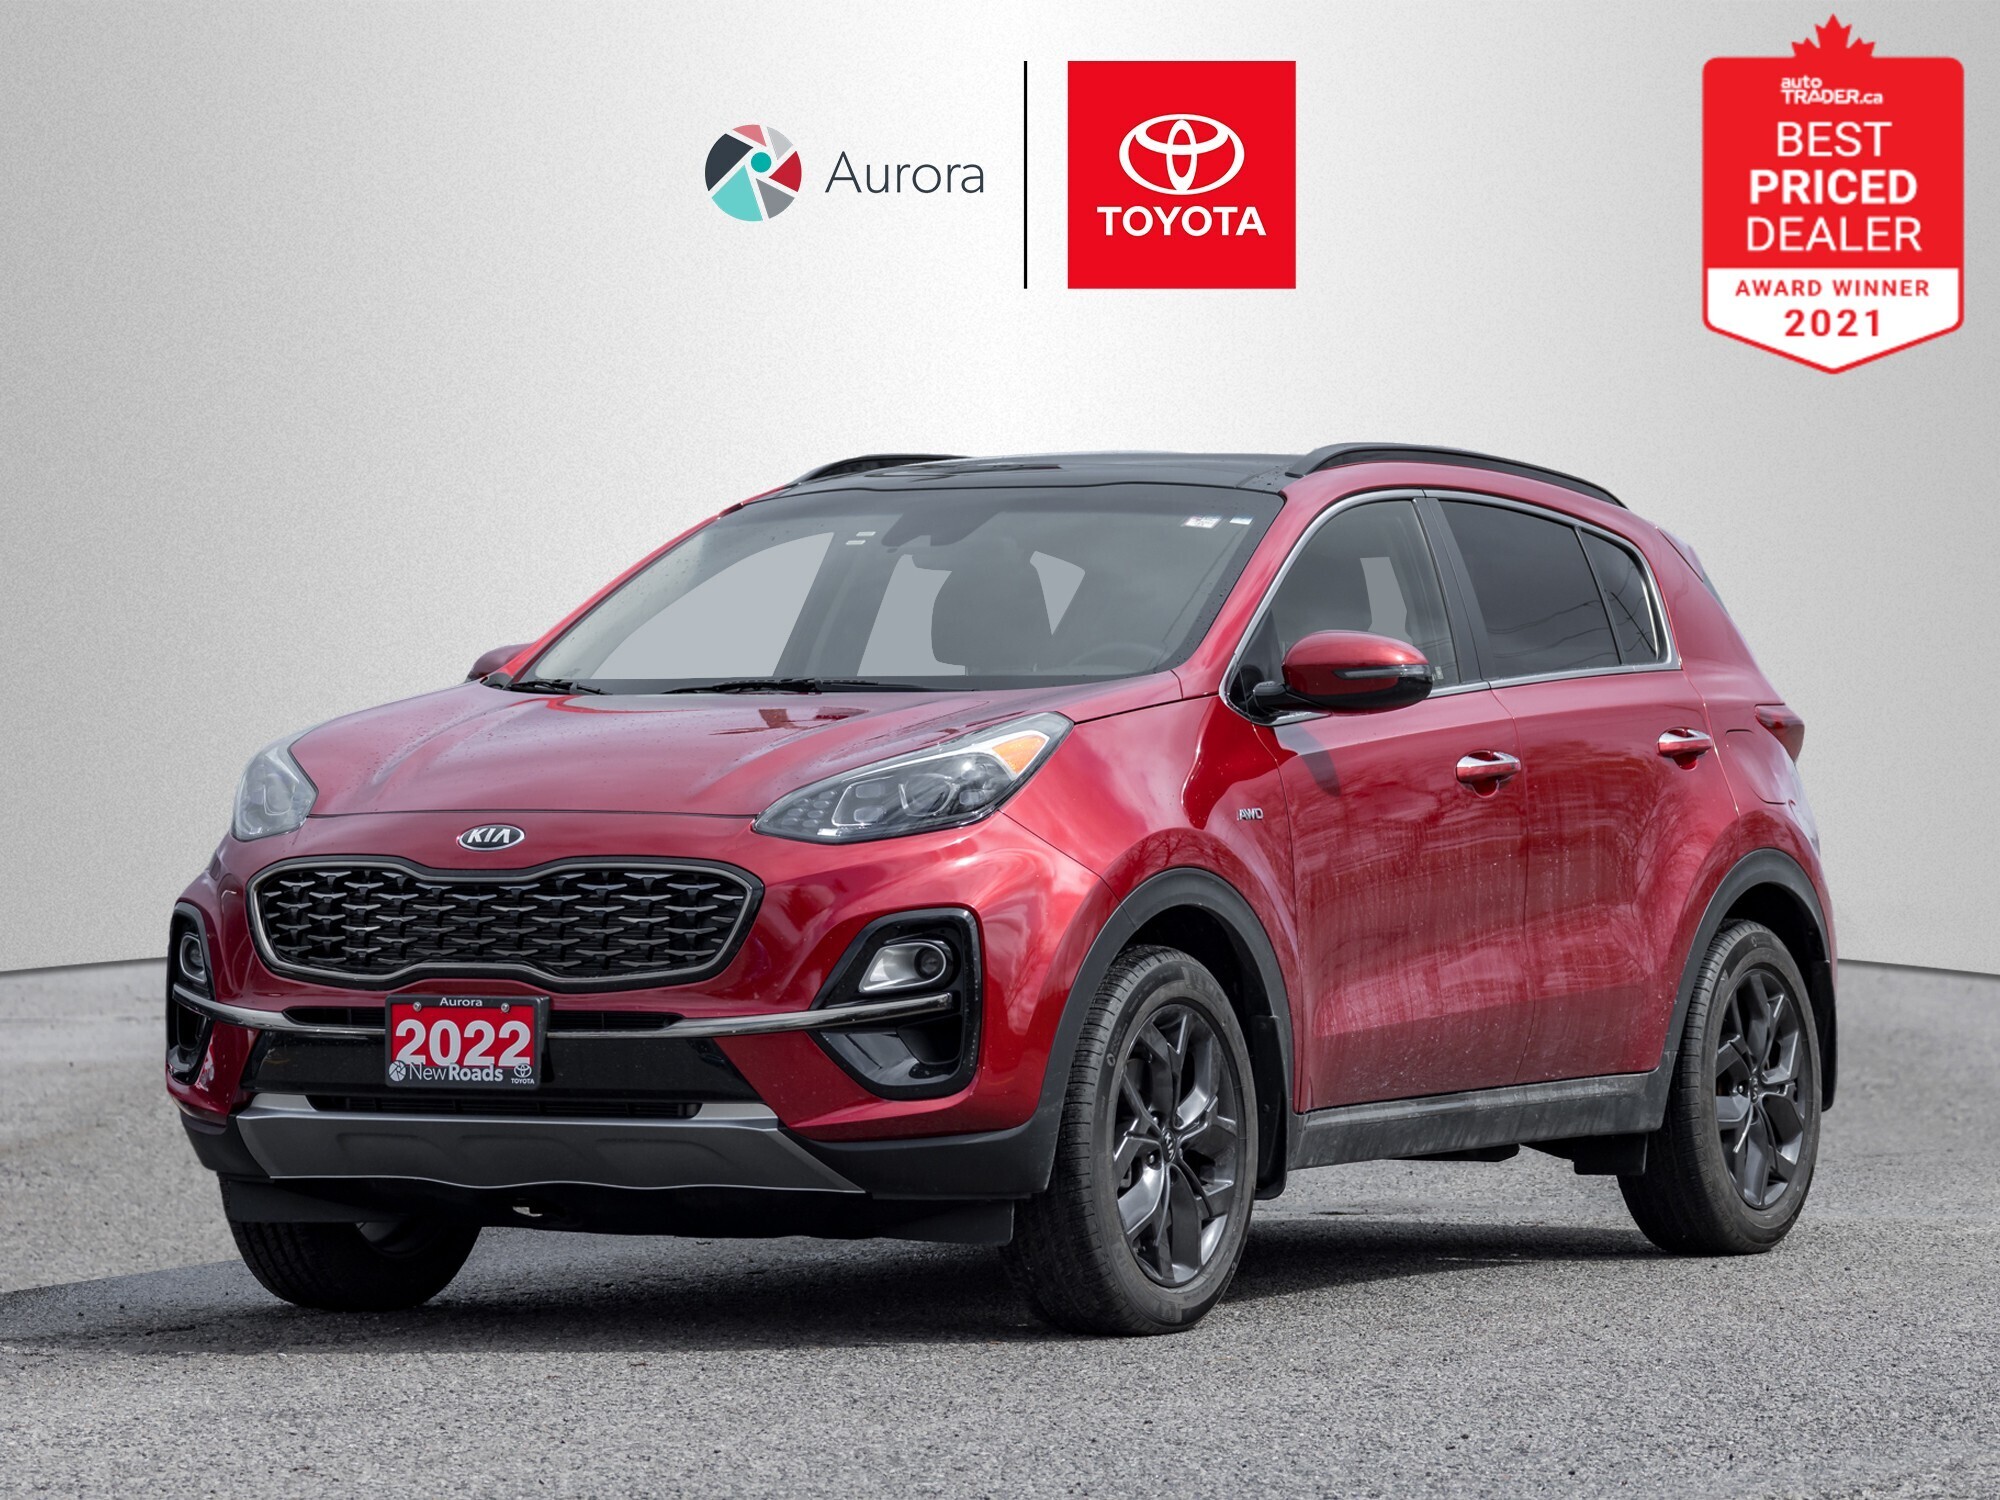 2022 Kia Sportage EX S AWD, Locally Owned, Clean Car fax Report